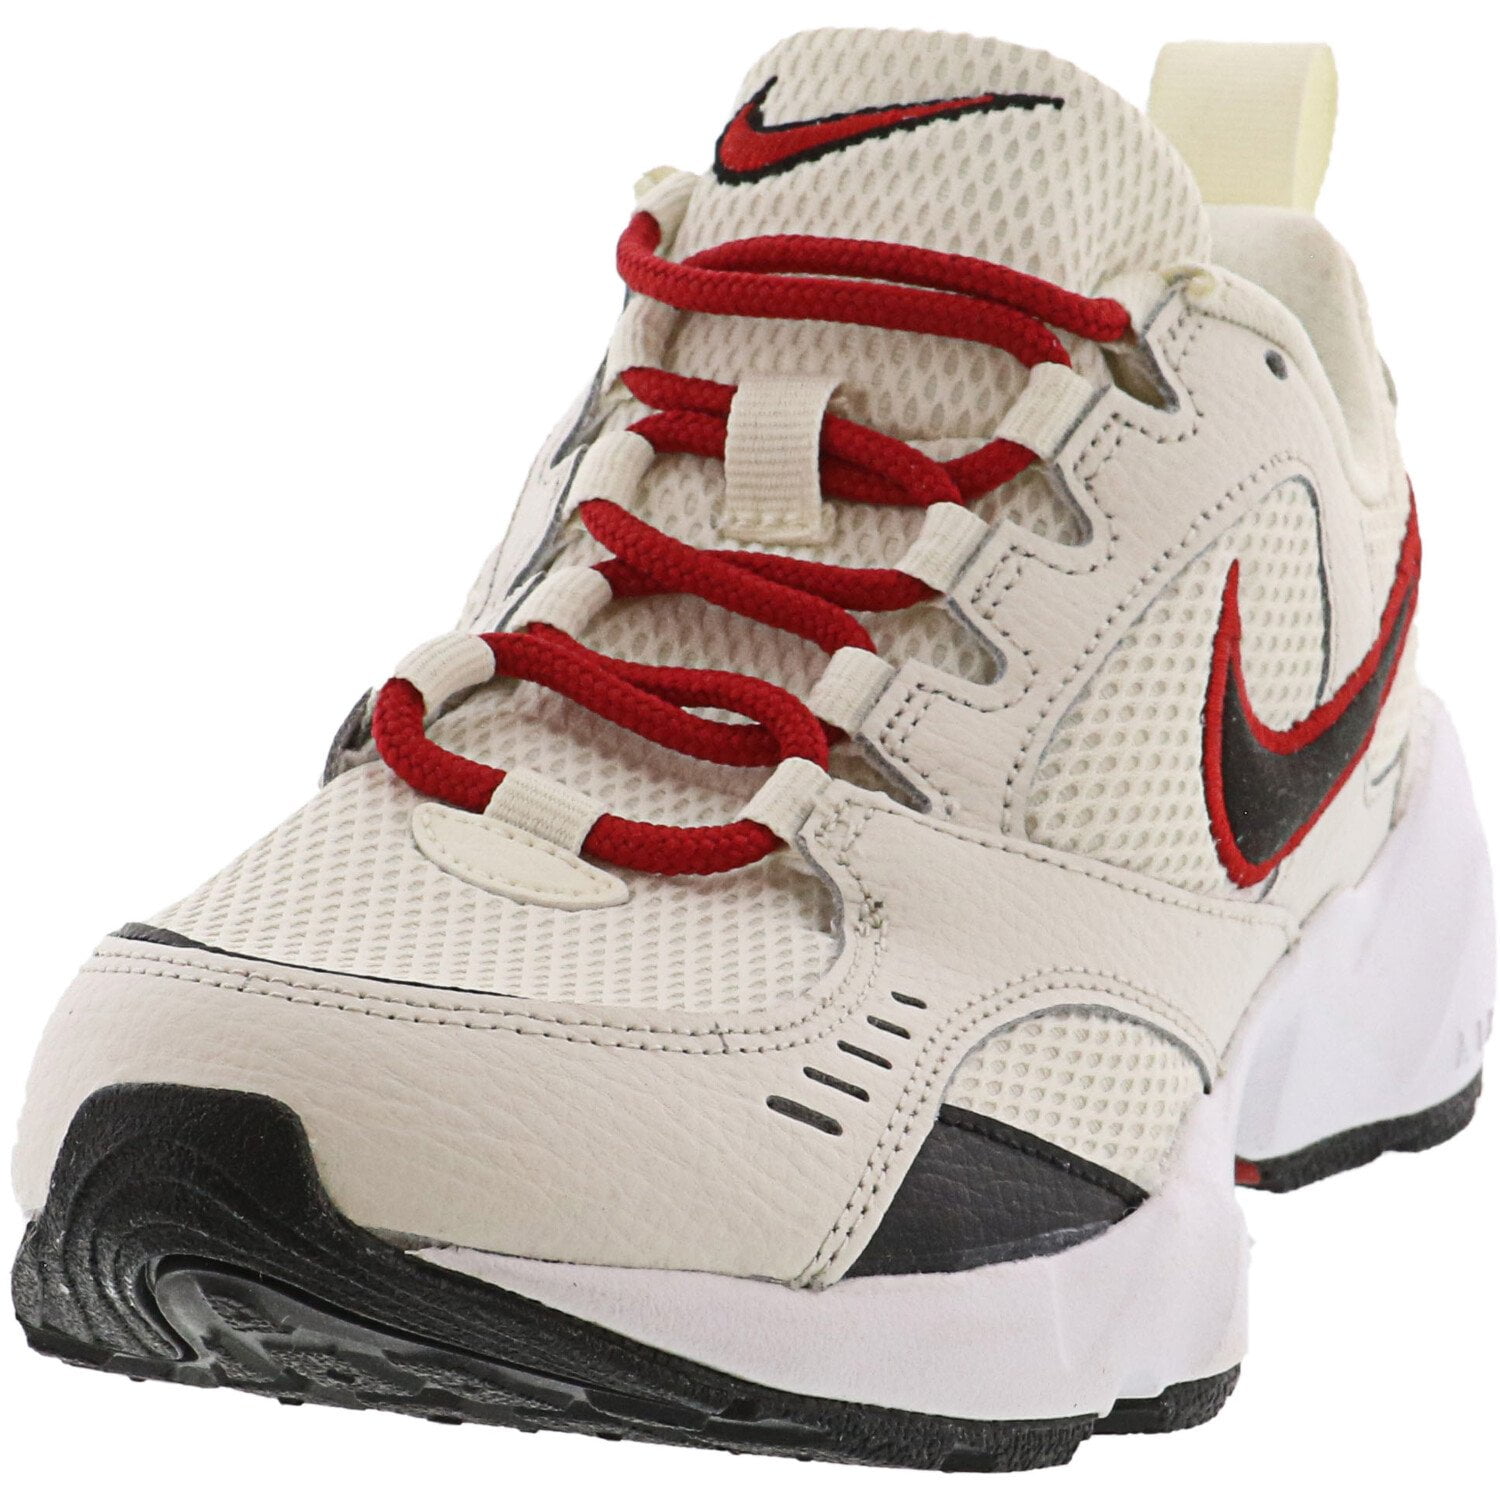 nike air heights good for running